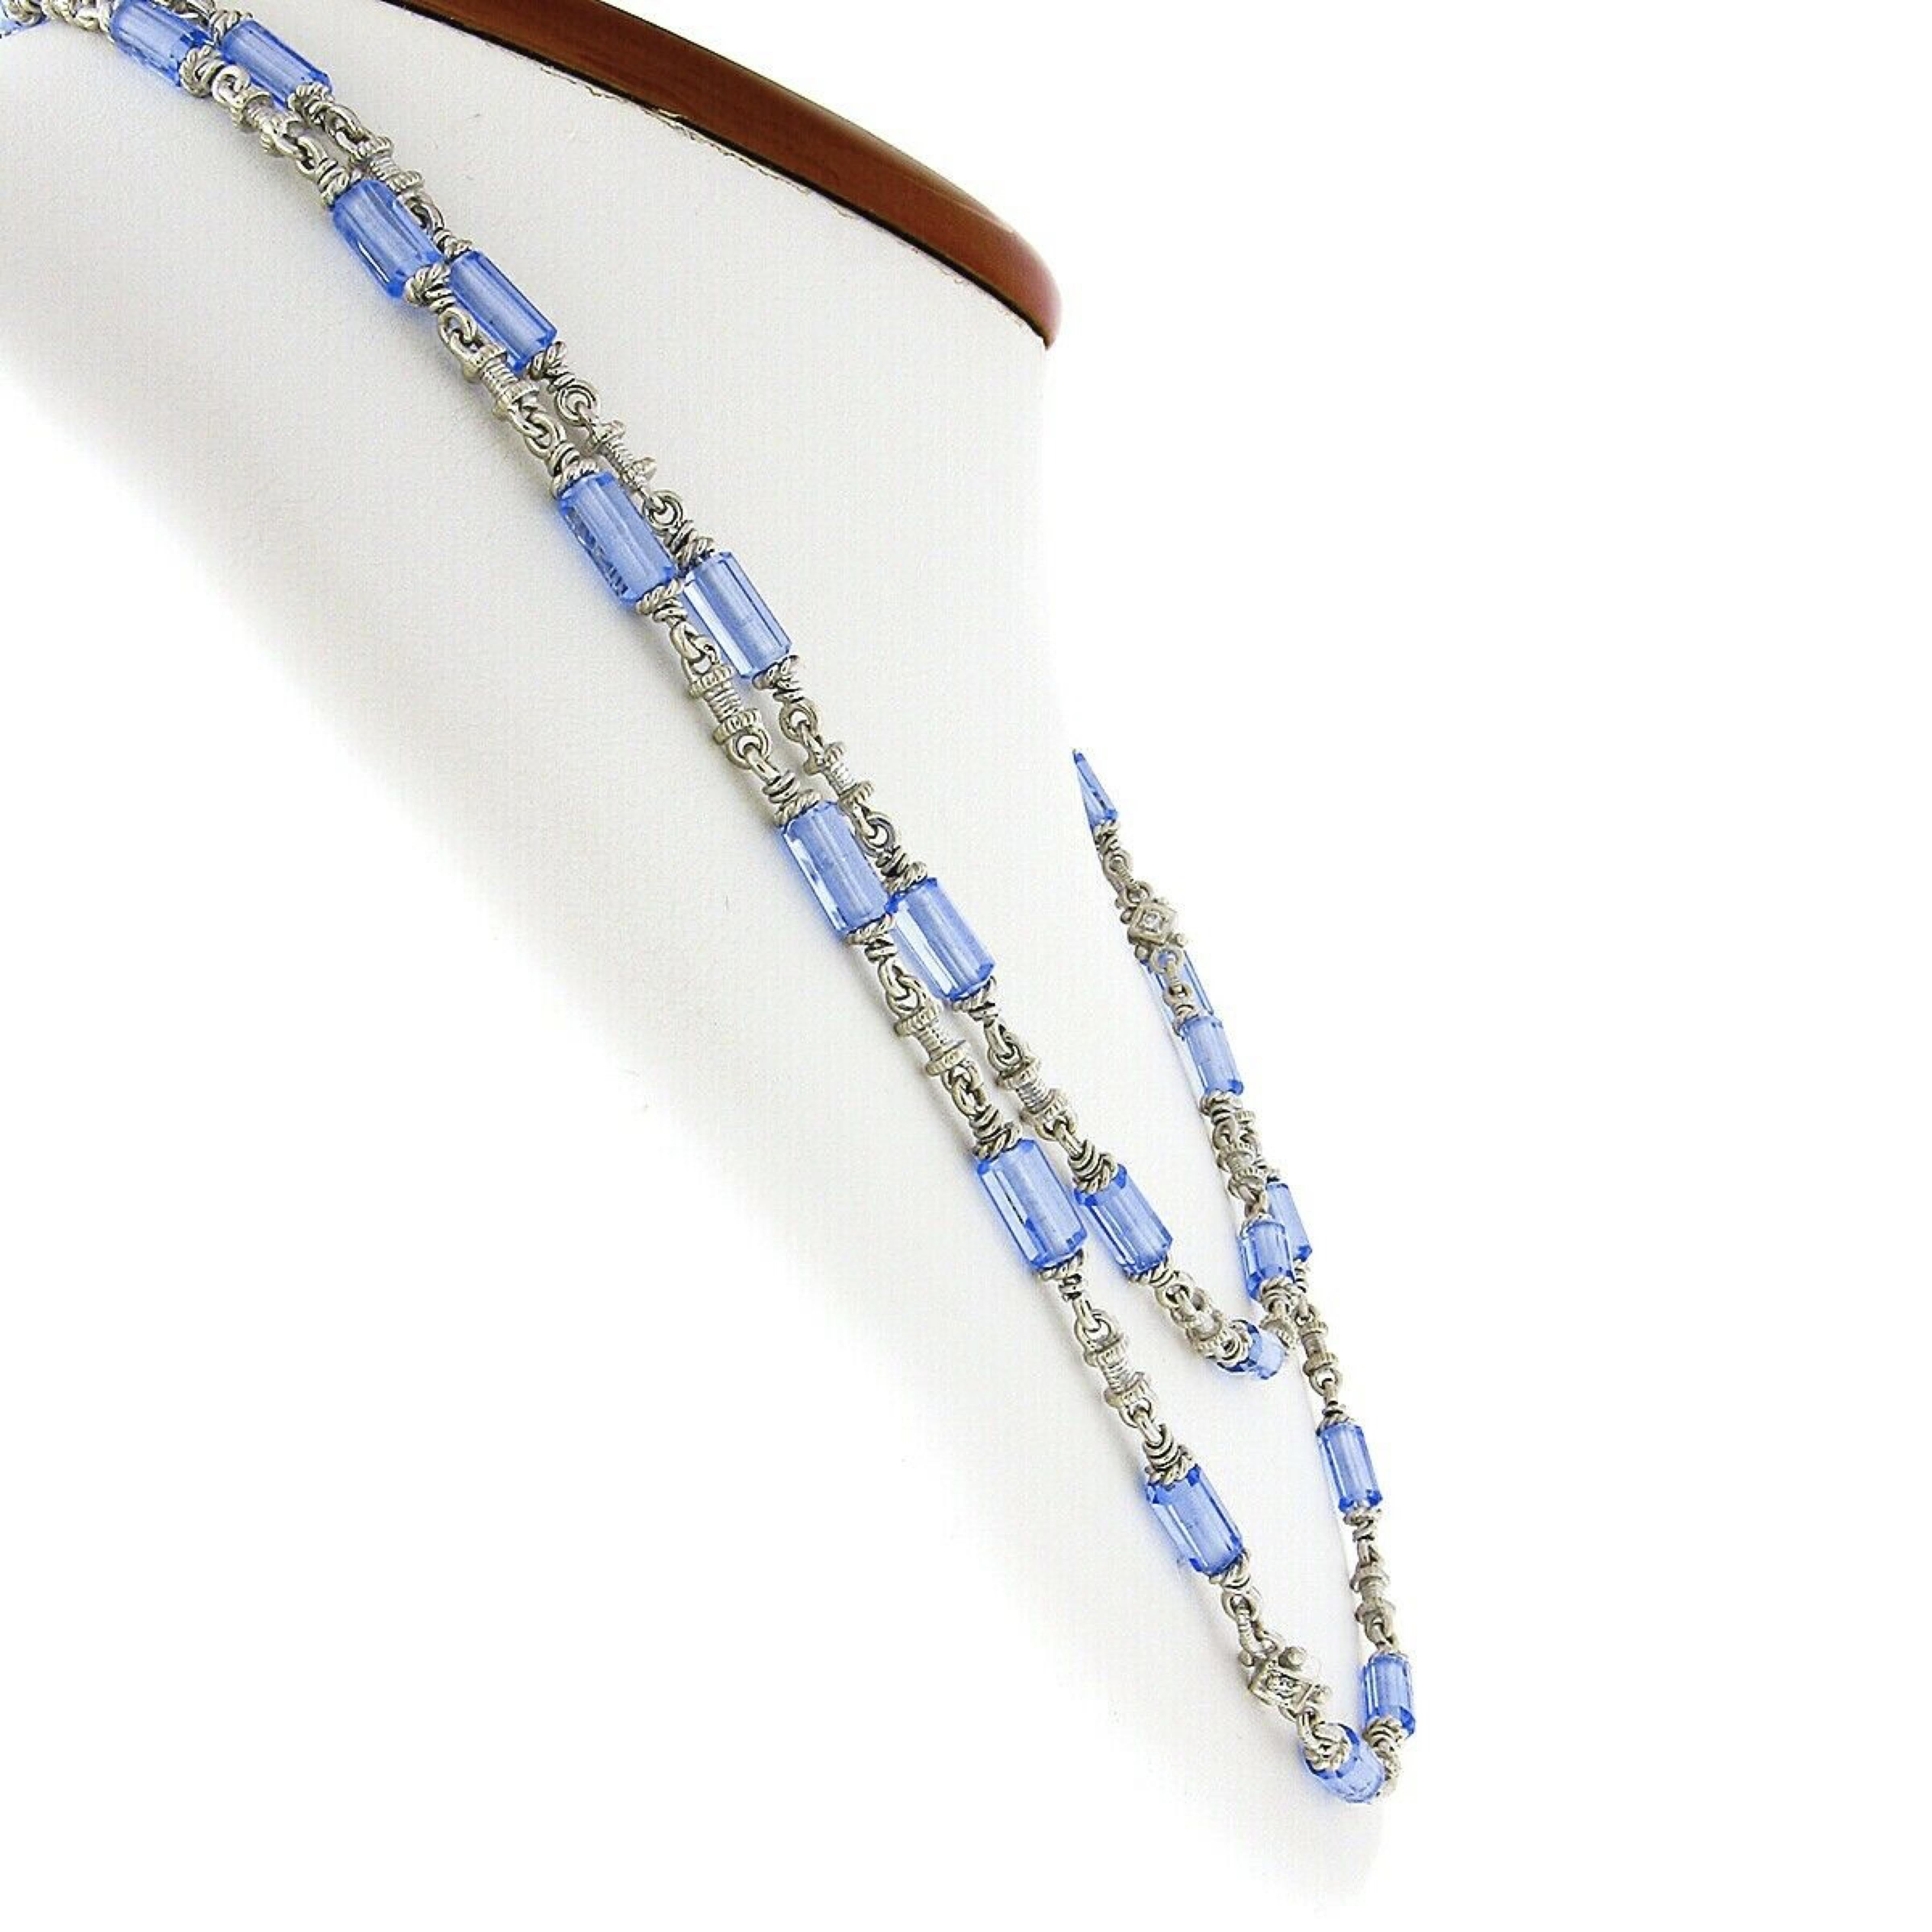 You are looking at an absolutely beautiful and well made Judith Ripka chain necklace that is crafted from solid 18k white gold and set with gorgeous, natural, blue topaz faceted tubes that have been carefully drilled through their center and set